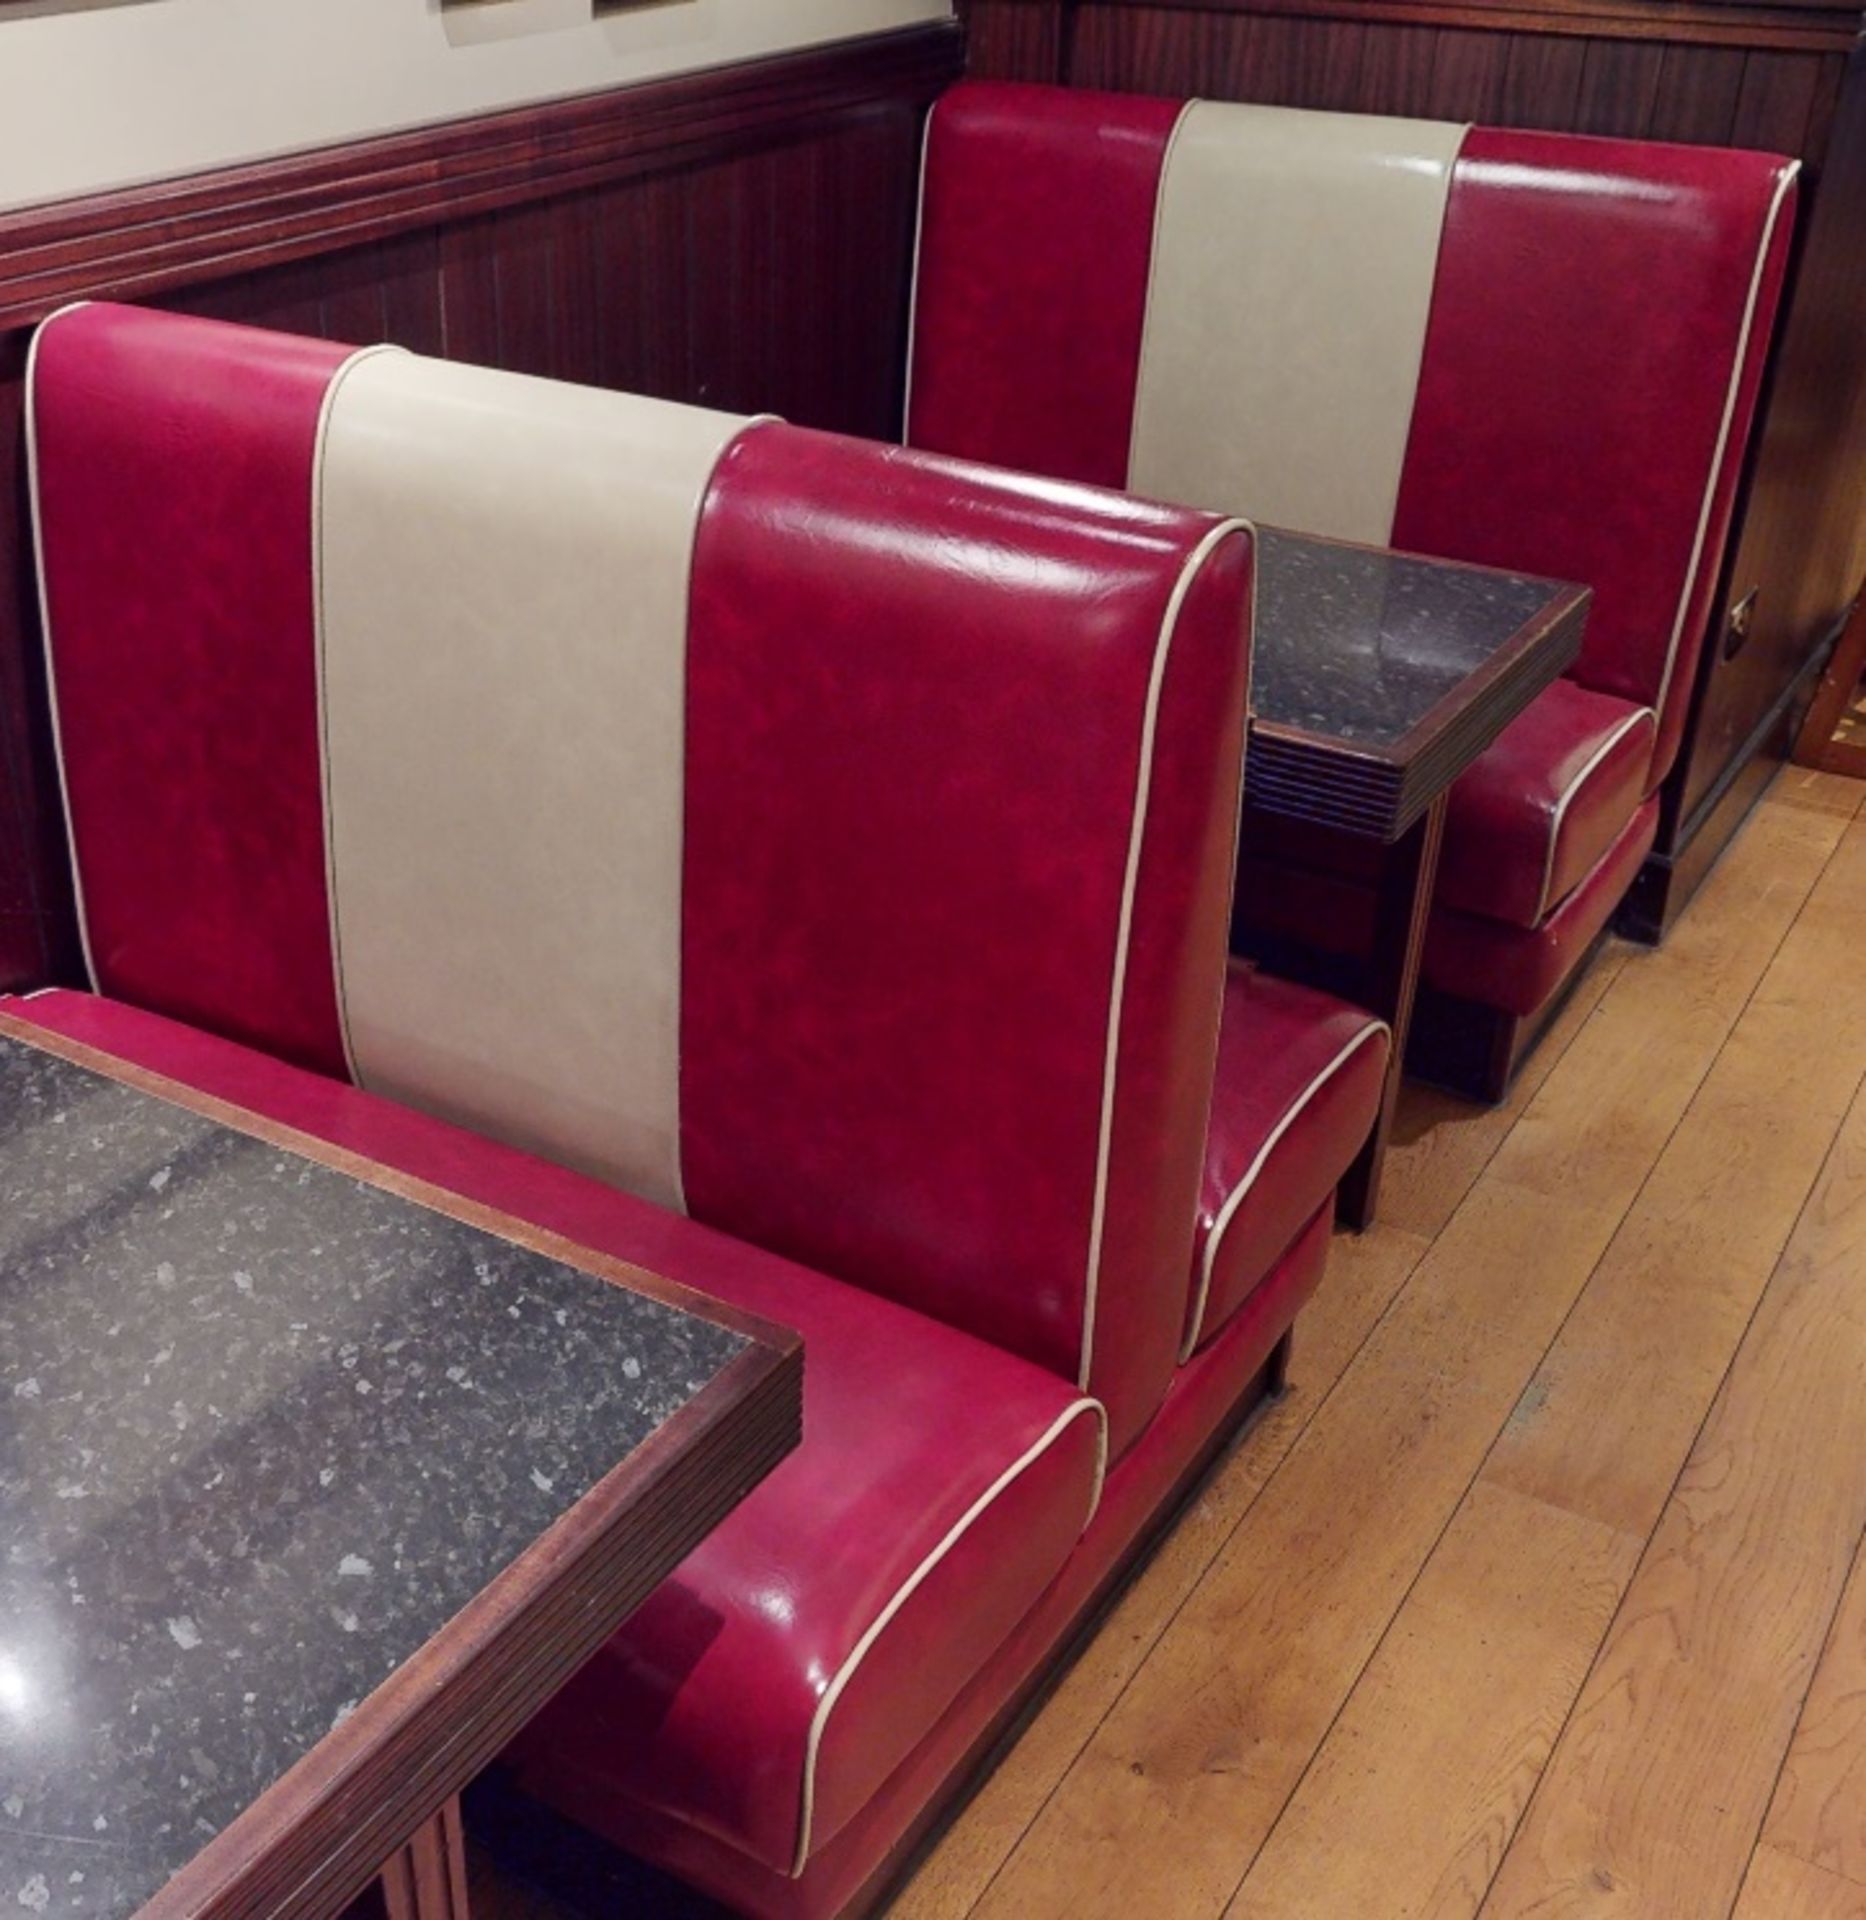 Selection of Double Seating Benches and Dining Tables to Seat Upto 12 Persons - Retro 1950's - Image 3 of 3